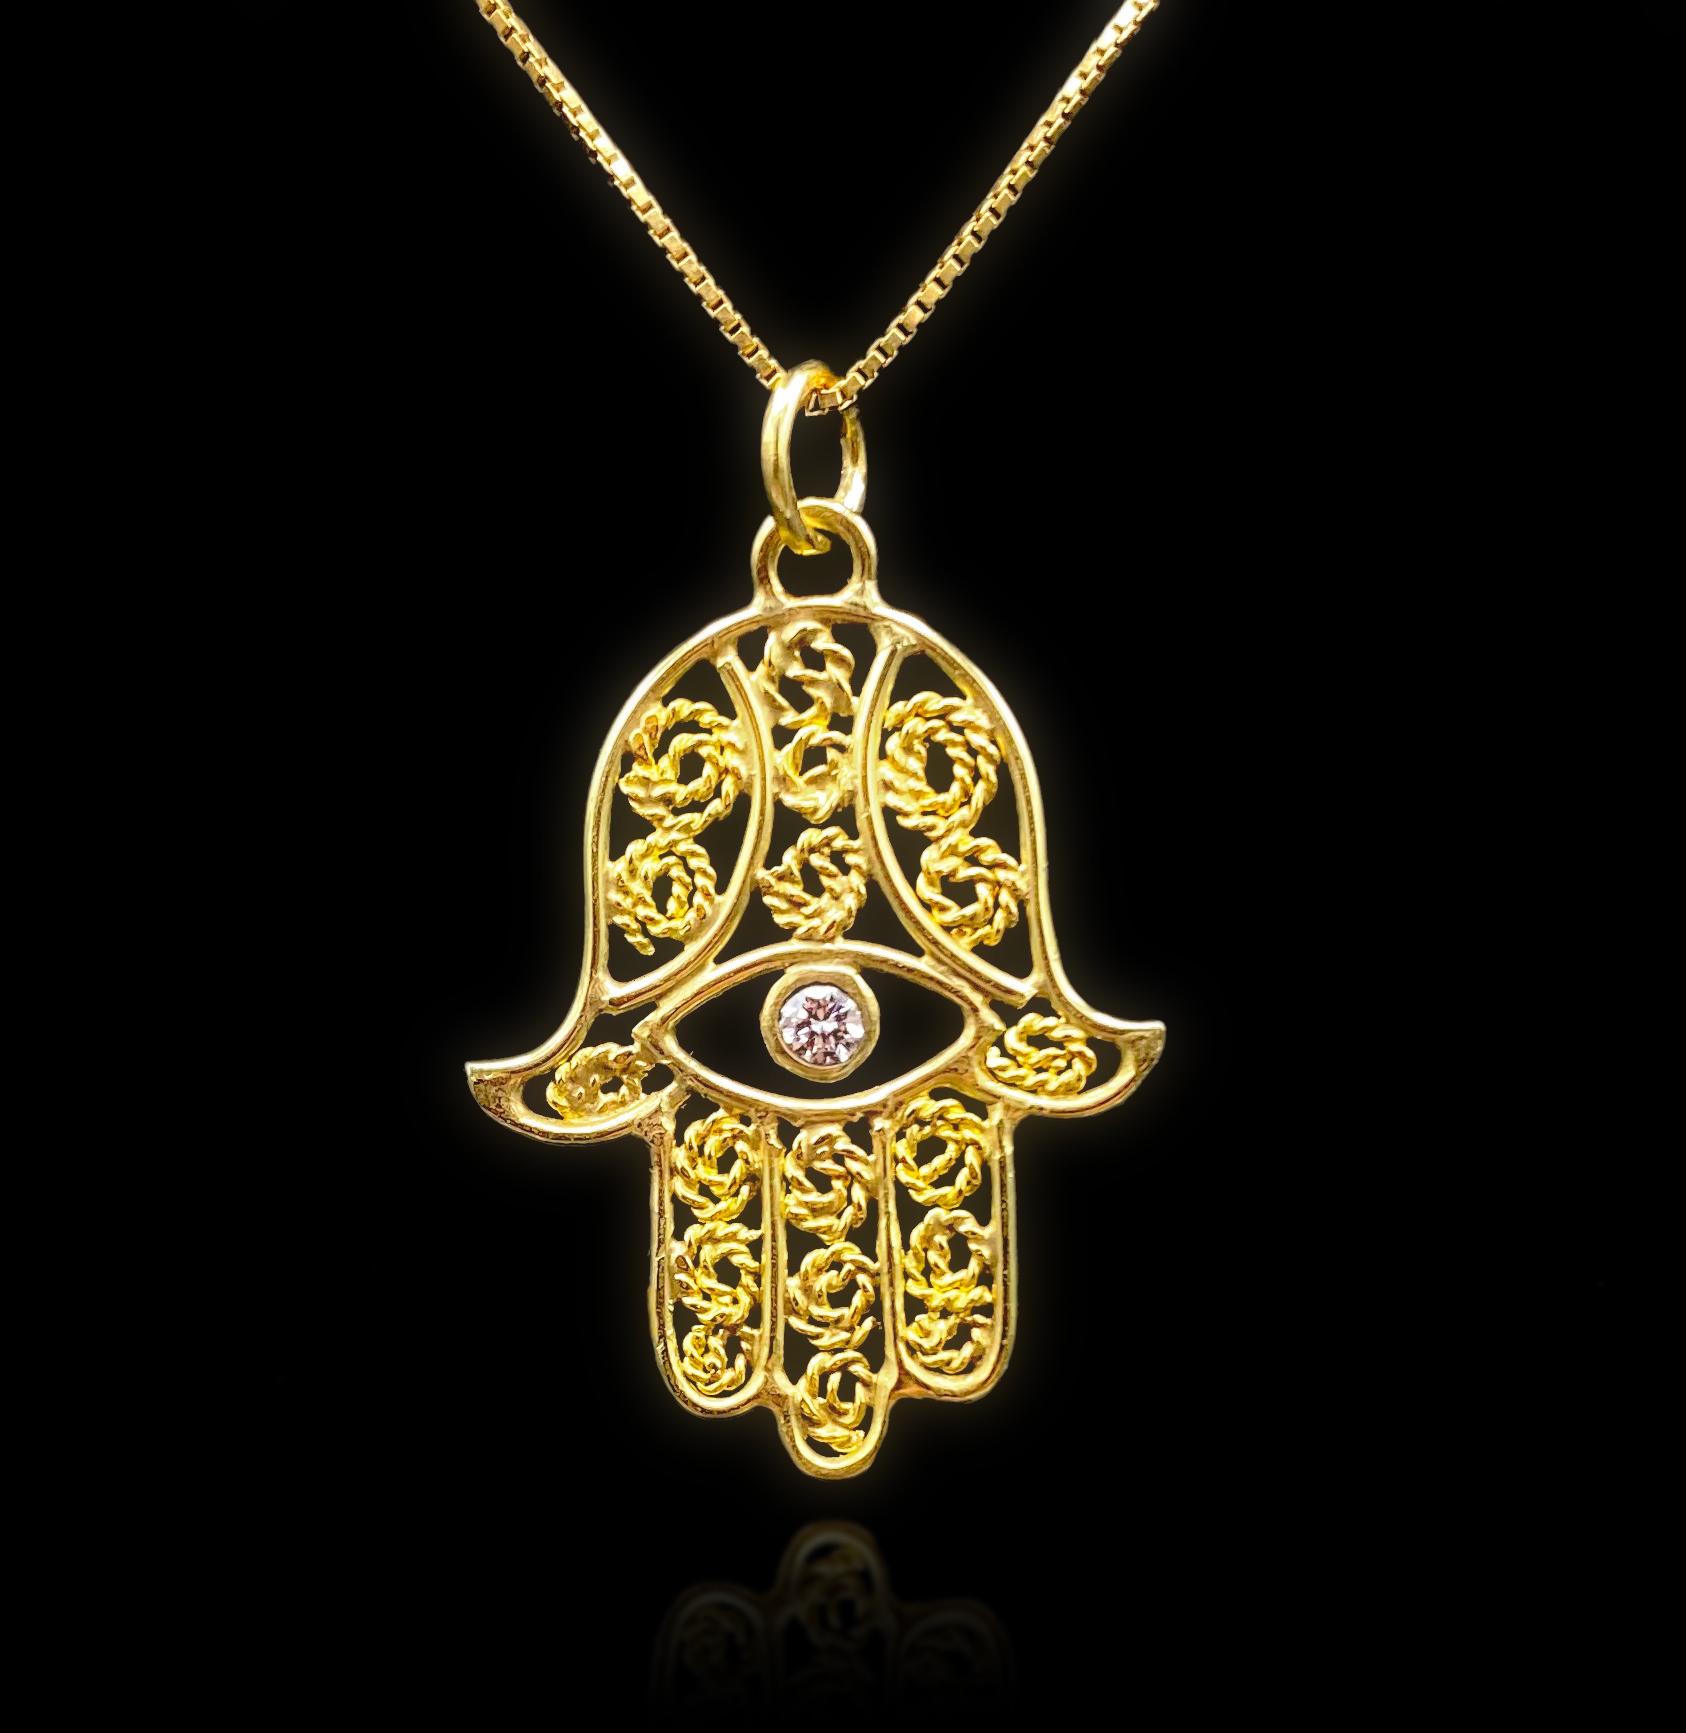 - Available
-Handmade
-18k gold frame.
-22k gold filigree wire.
-D-G VS1 0.107 carat diamond.
-This item is sold as a pendant only.

One-of-a-Kind Hand of Fatima Pendant

The Hand of Fatima, also known as Khamsa (Arabic for the number 5) or Kaf